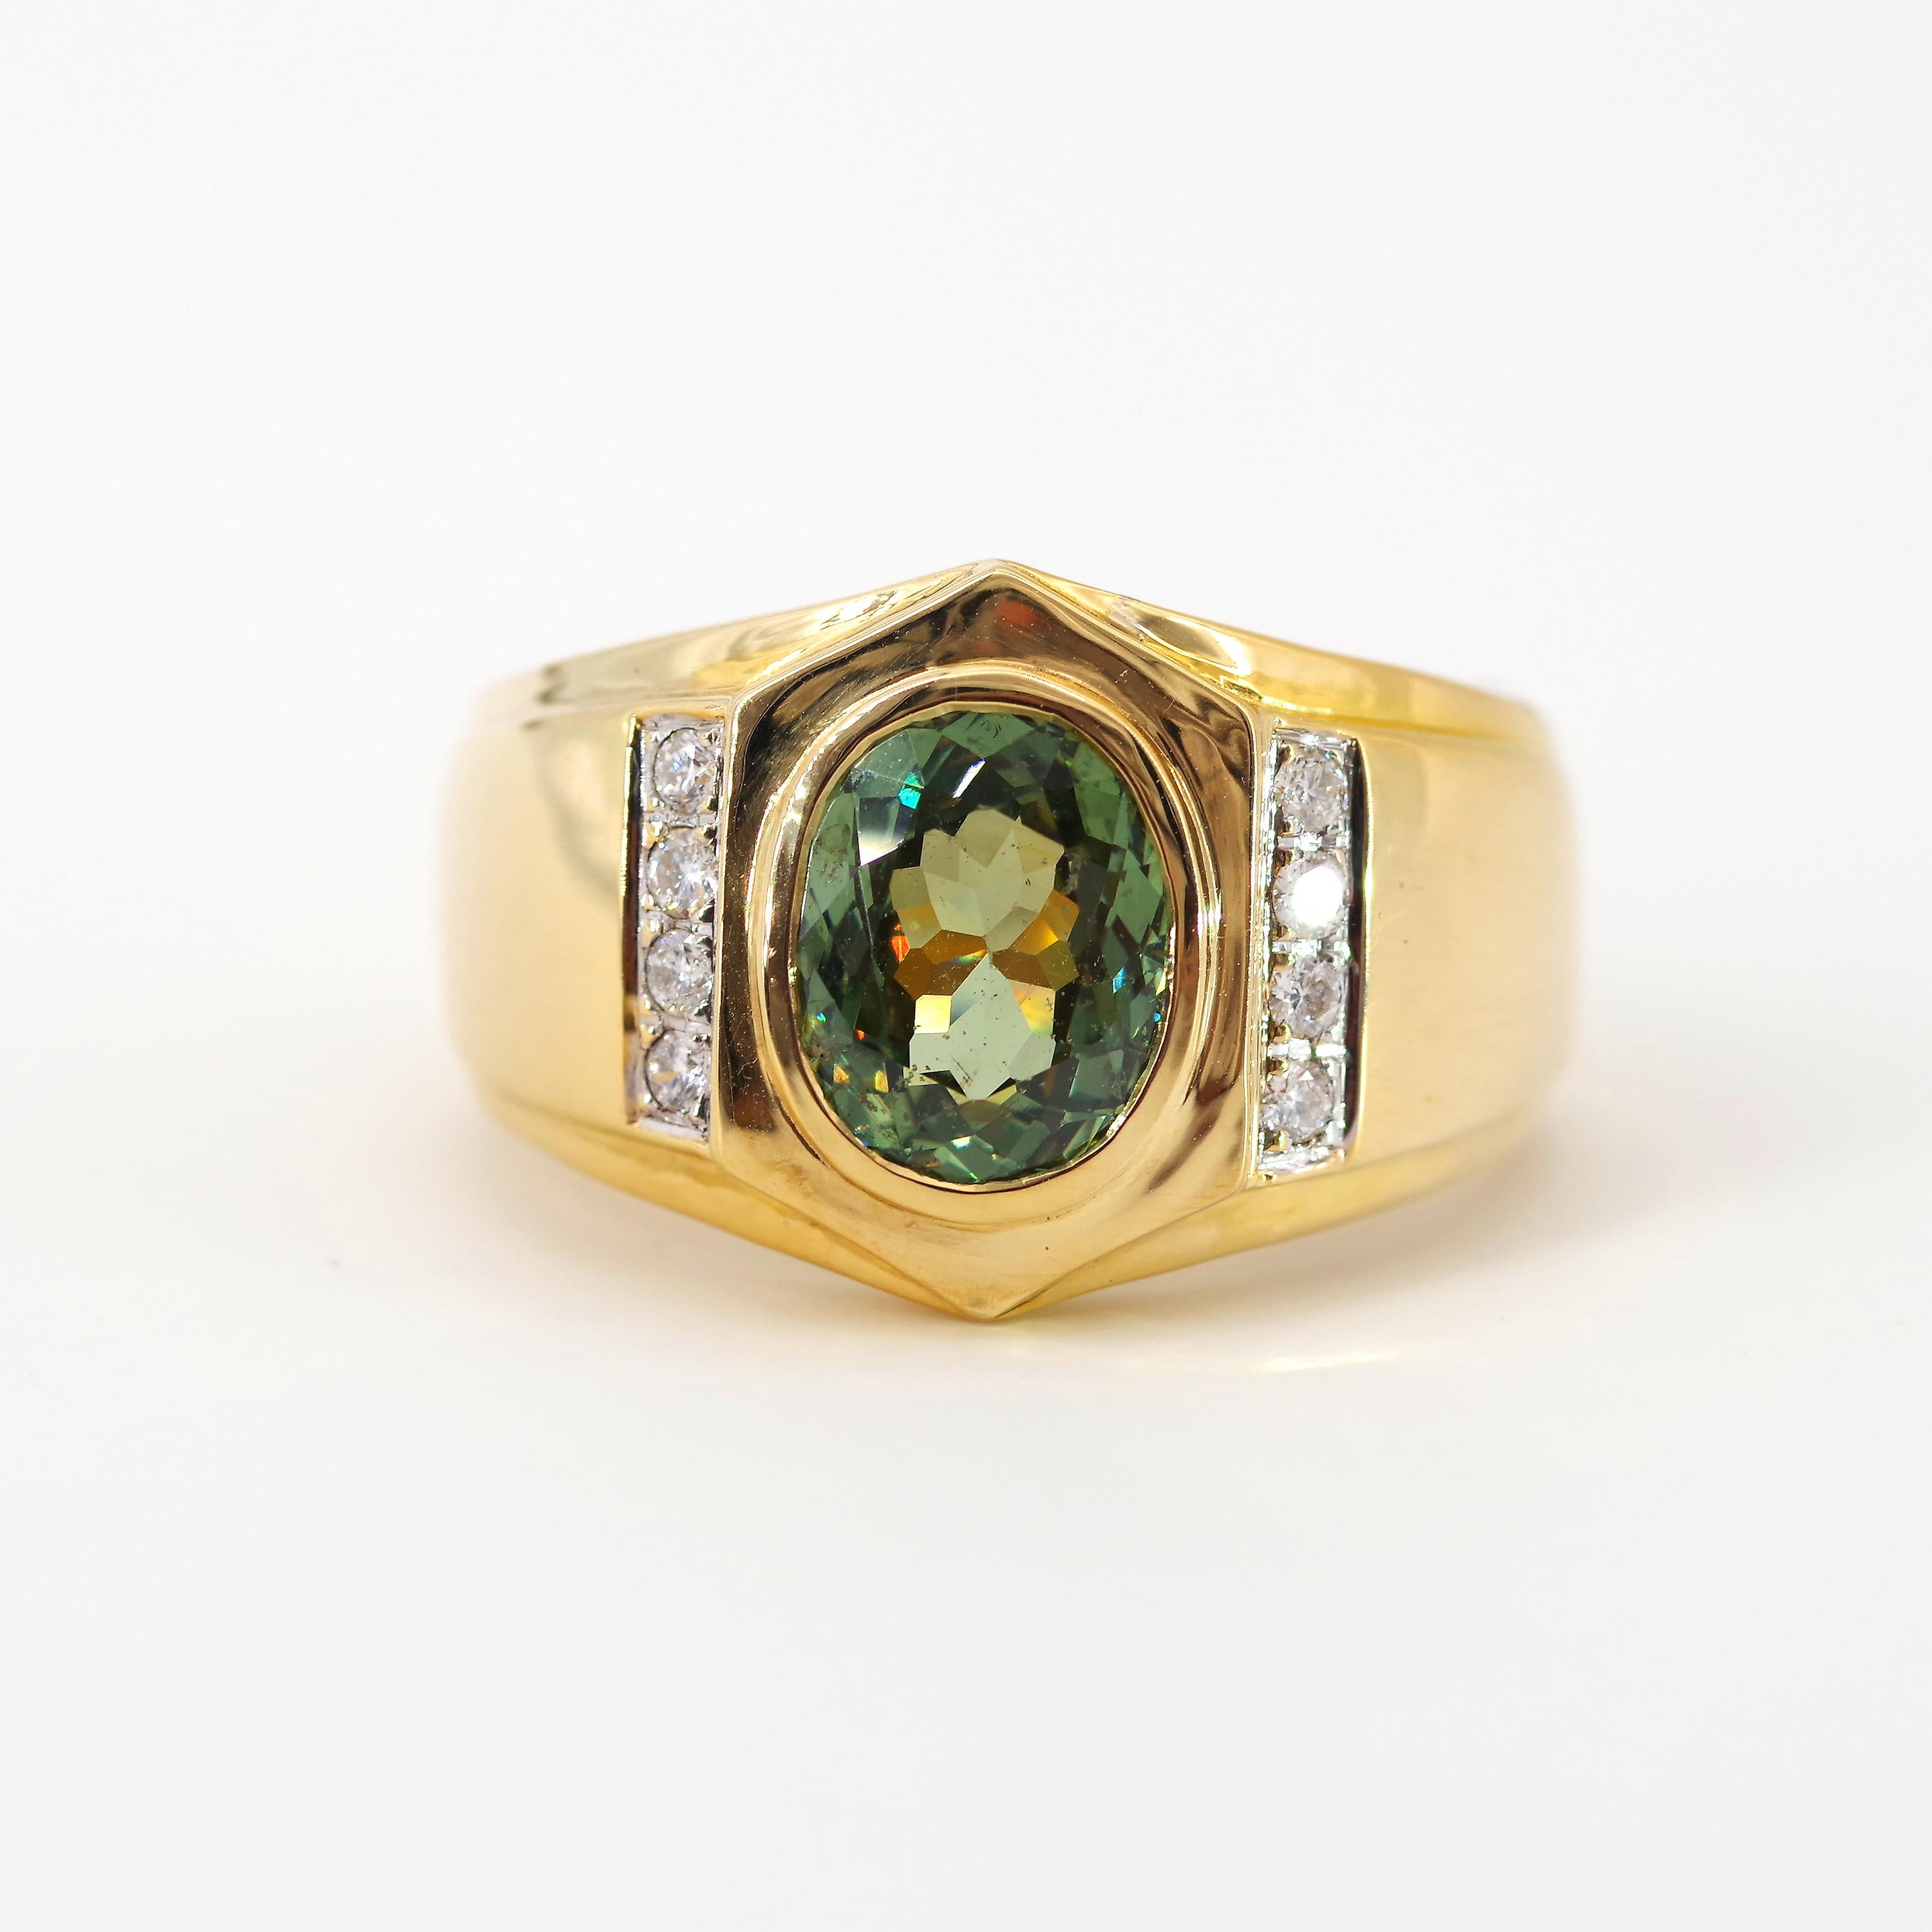 Demantoid garnets are the rarest species of garnet and the most valuable. They were first discovered in the Ural mountains of Russia in the early nineteenth century and were typically found in very small sizes. There are two main reasons for their